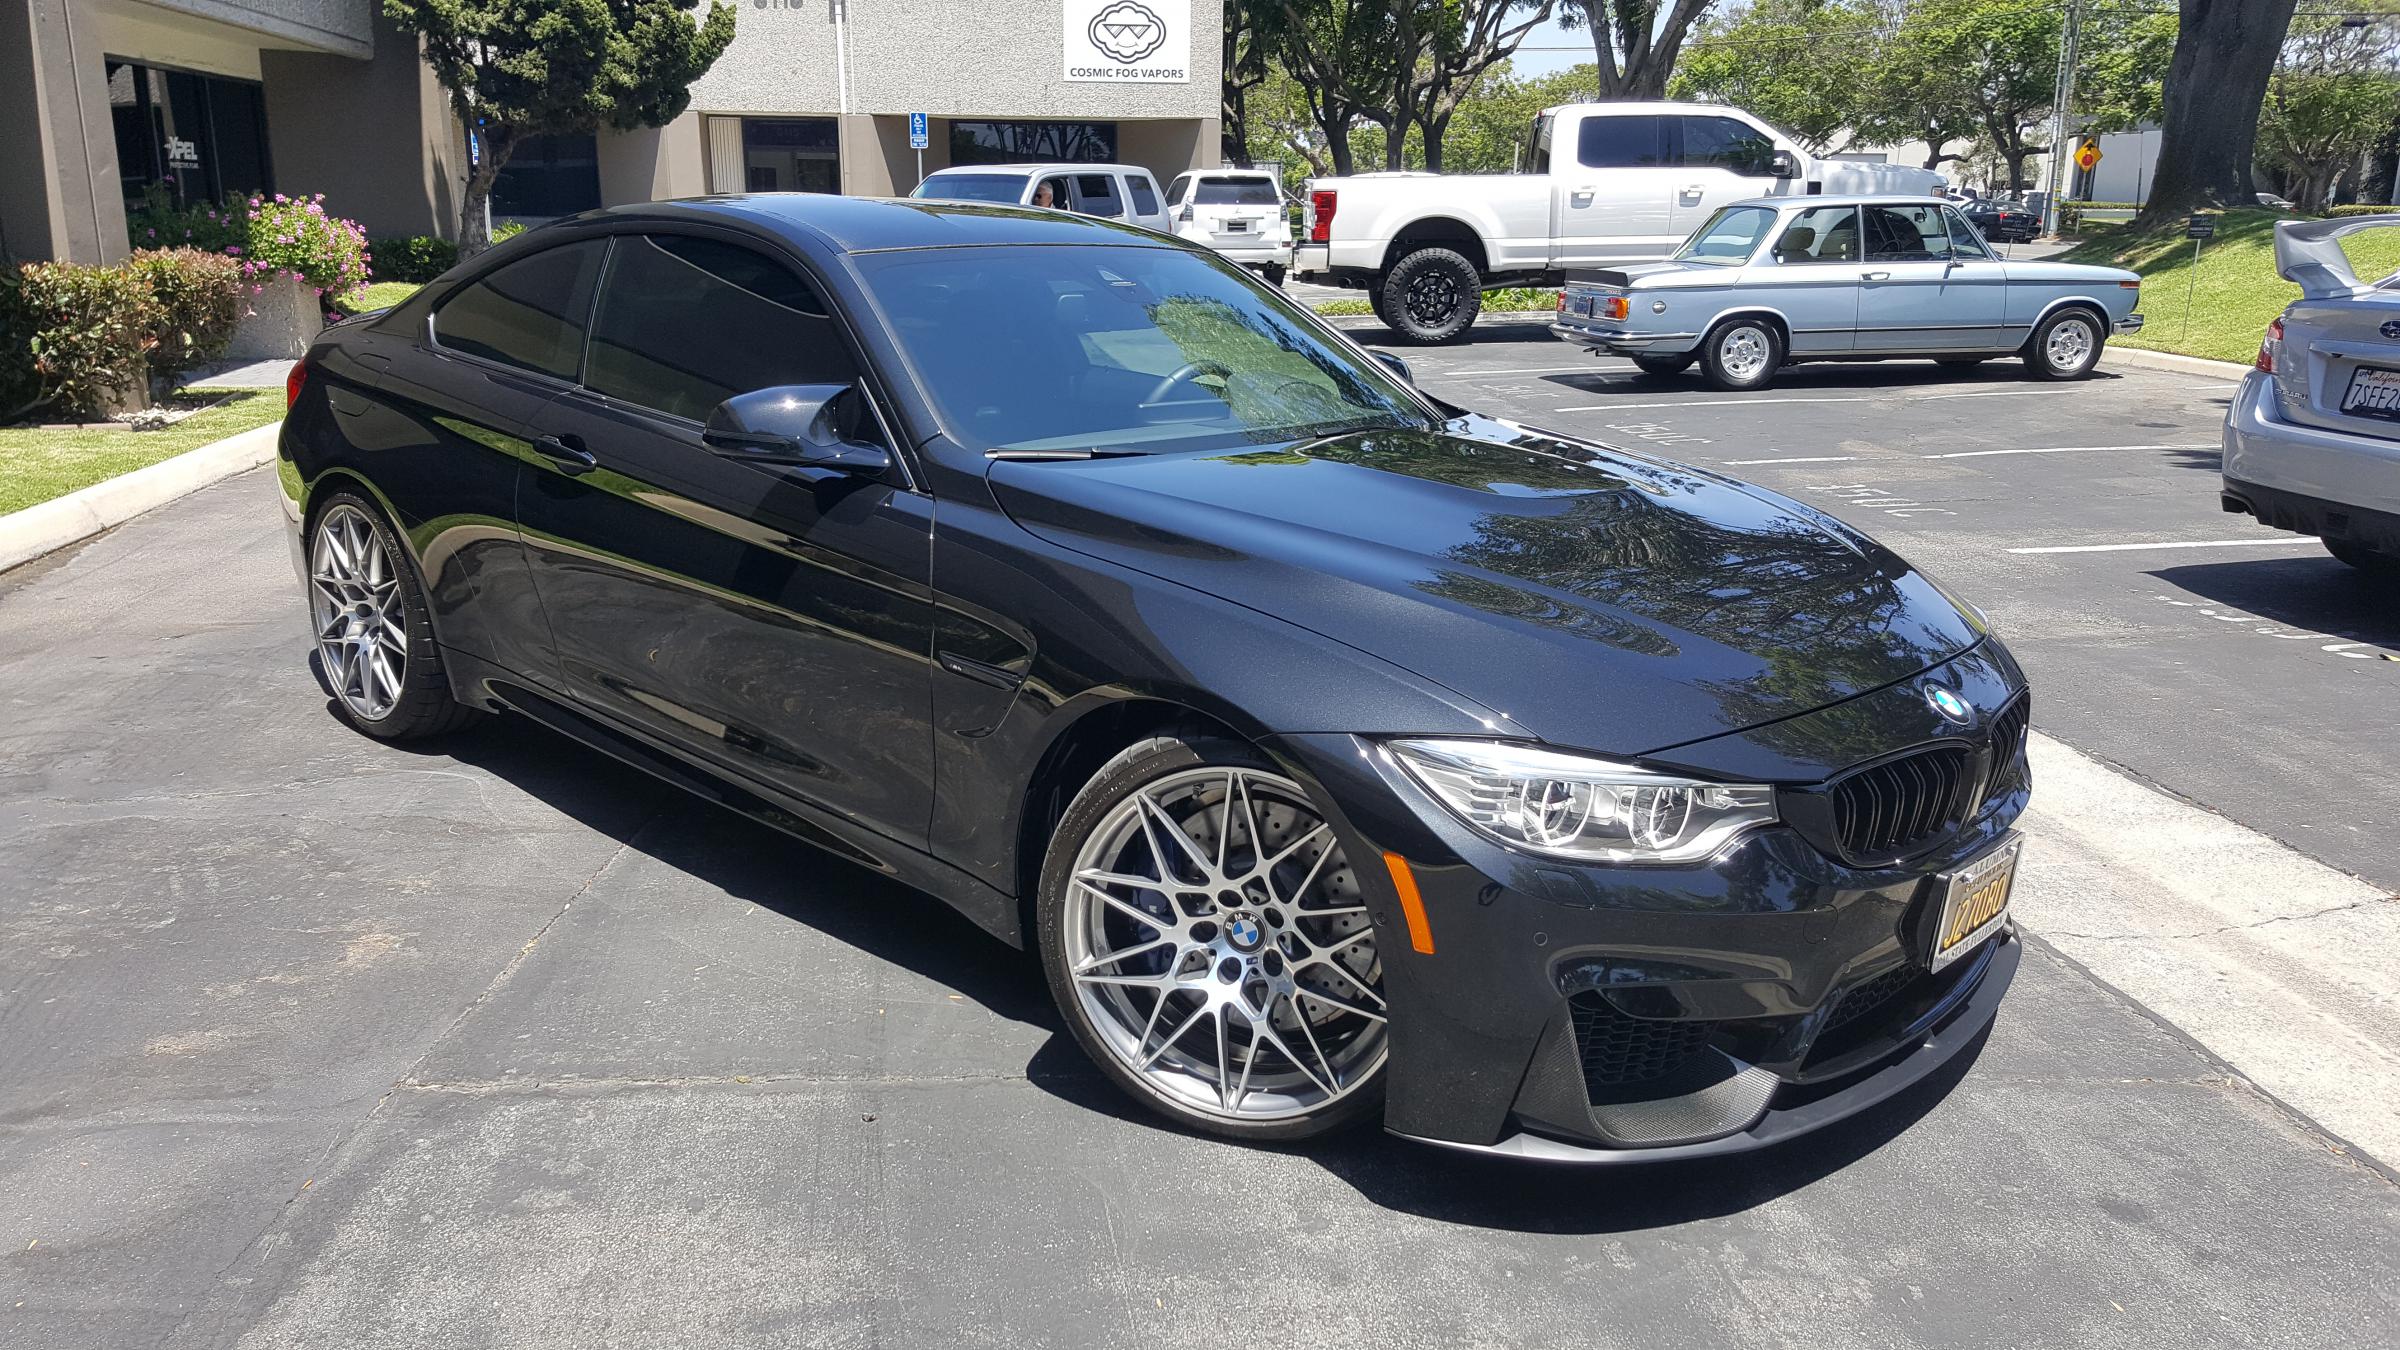 is ceramic coating worth it from your experience? - XBimmers